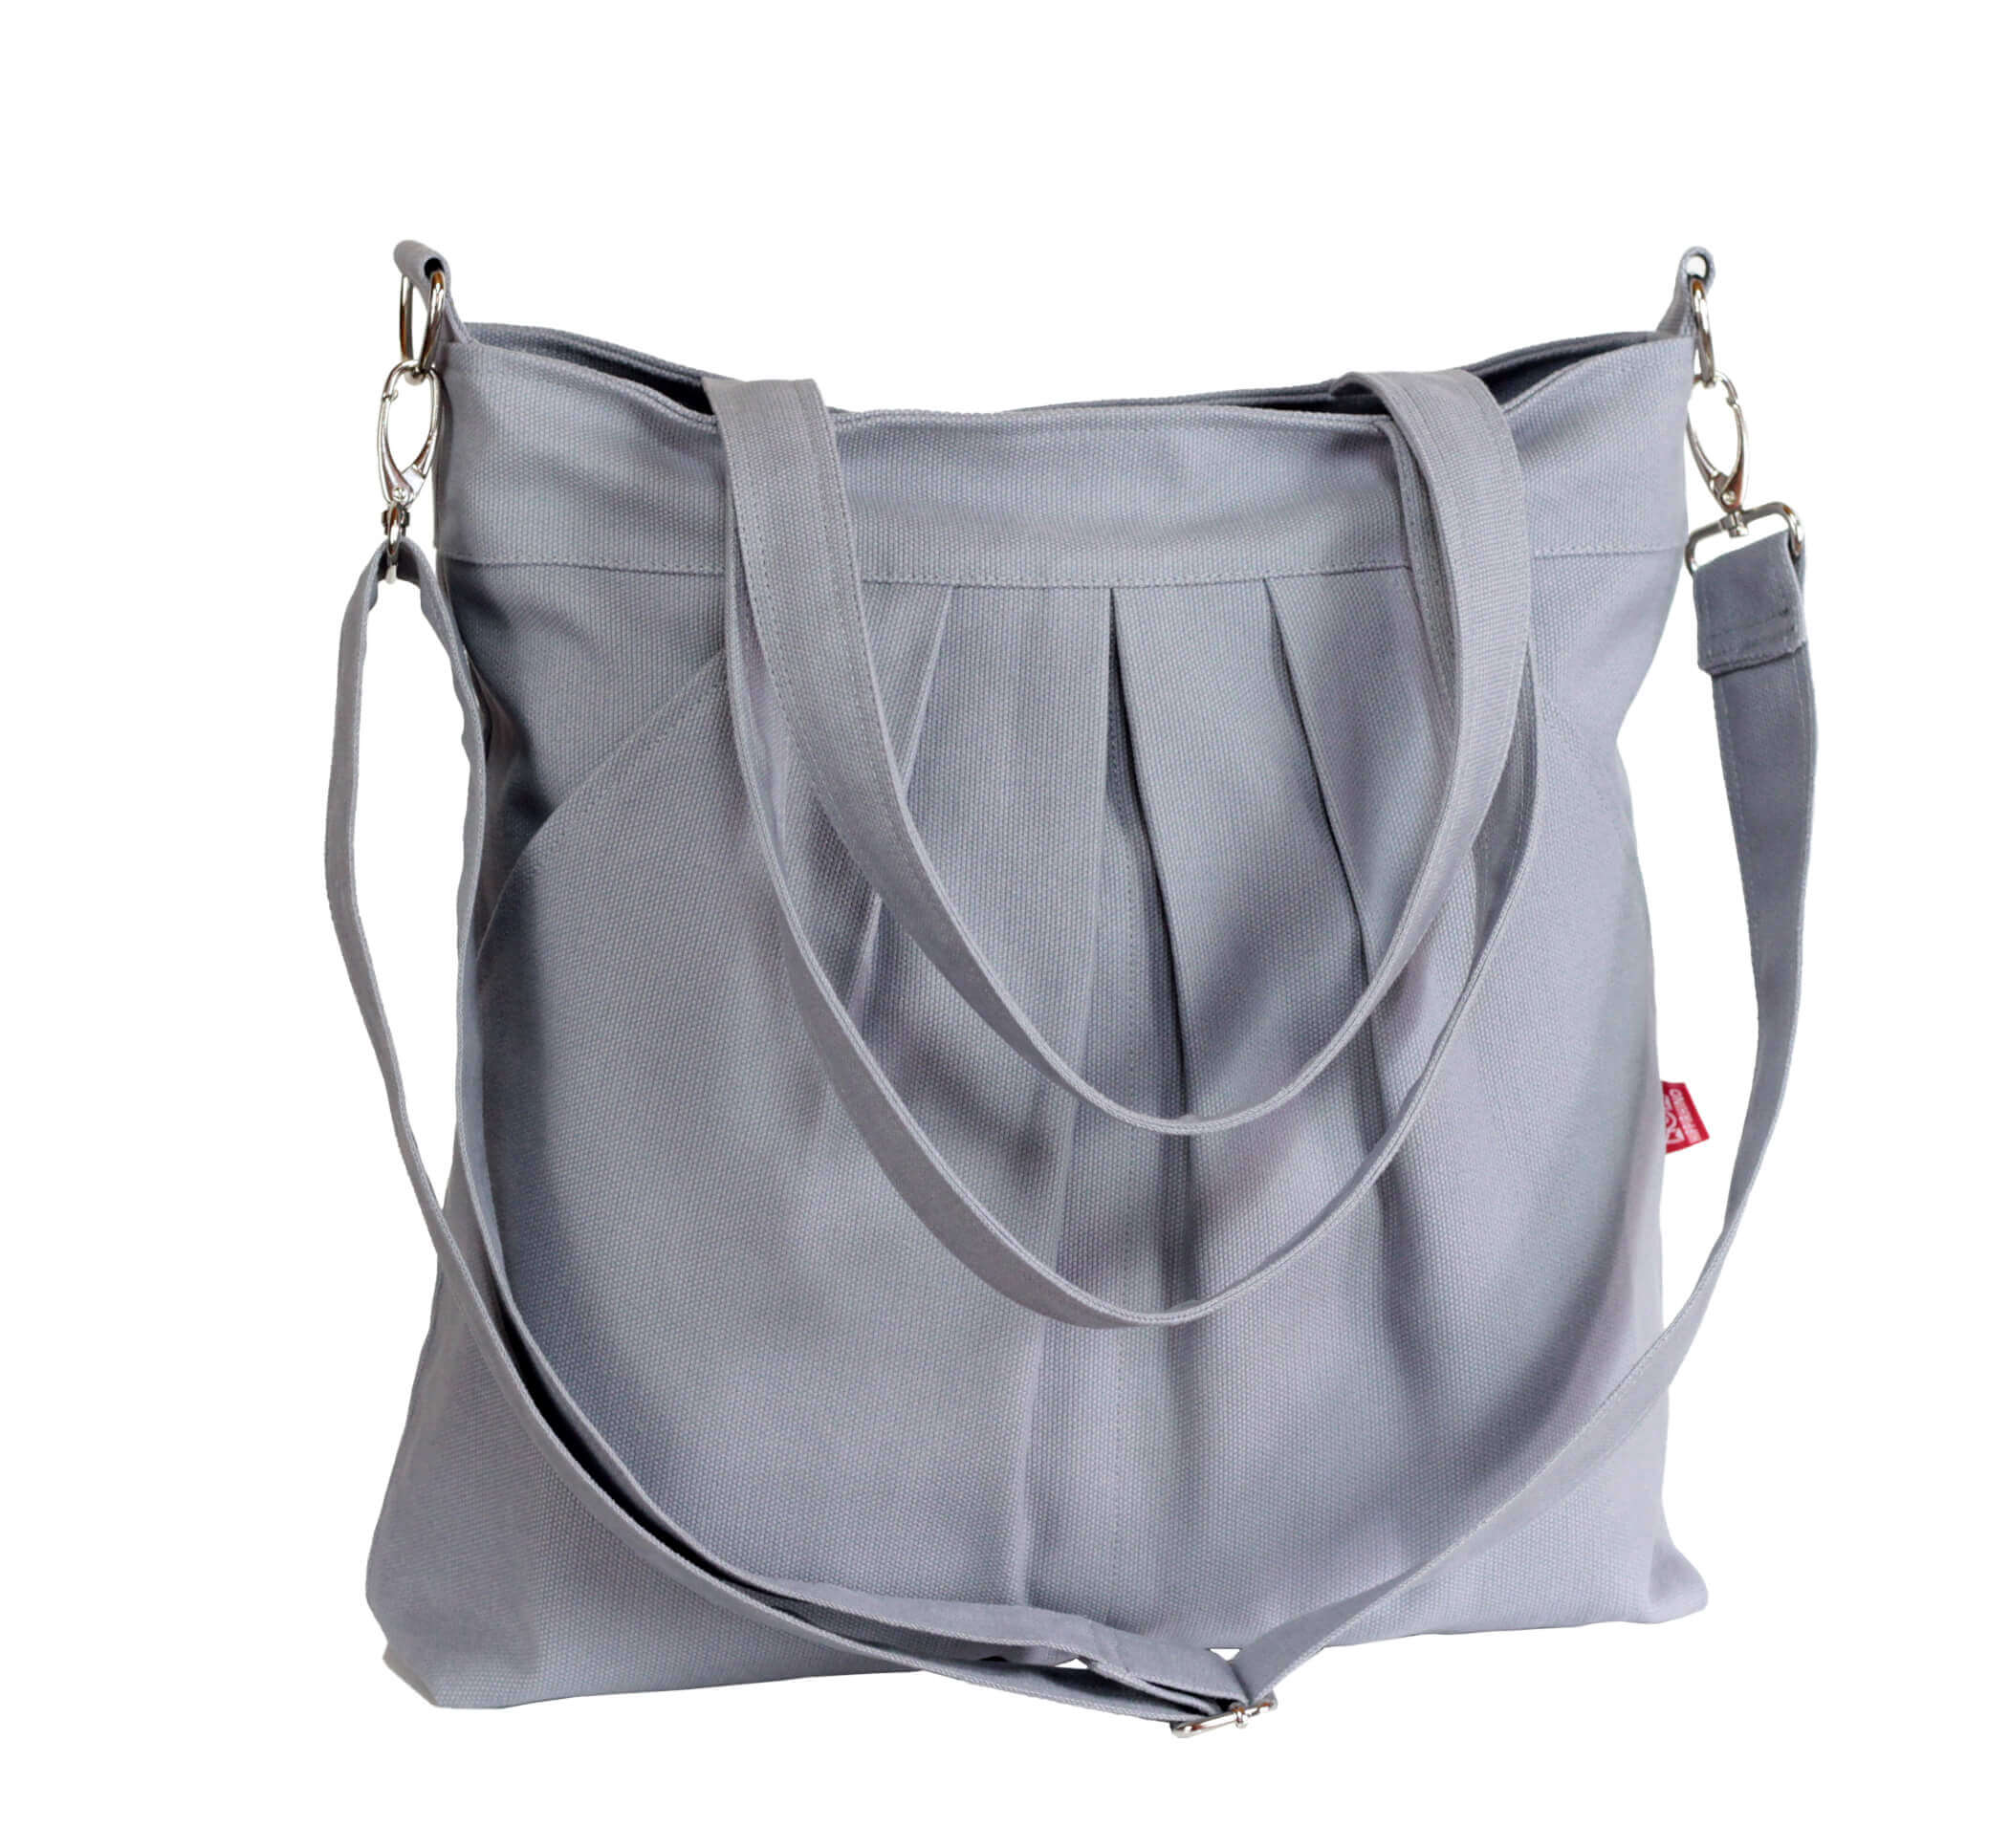 Gray Canvas Shoulder Crossbody Bag, Tote Bag, Washable Pleated, Large Bag,  Bottle Pocket Bag, Top Zippered, Fully Lined, School College Bag -  Hippirhino Purses Totes Custom Personalized Handmade Bags